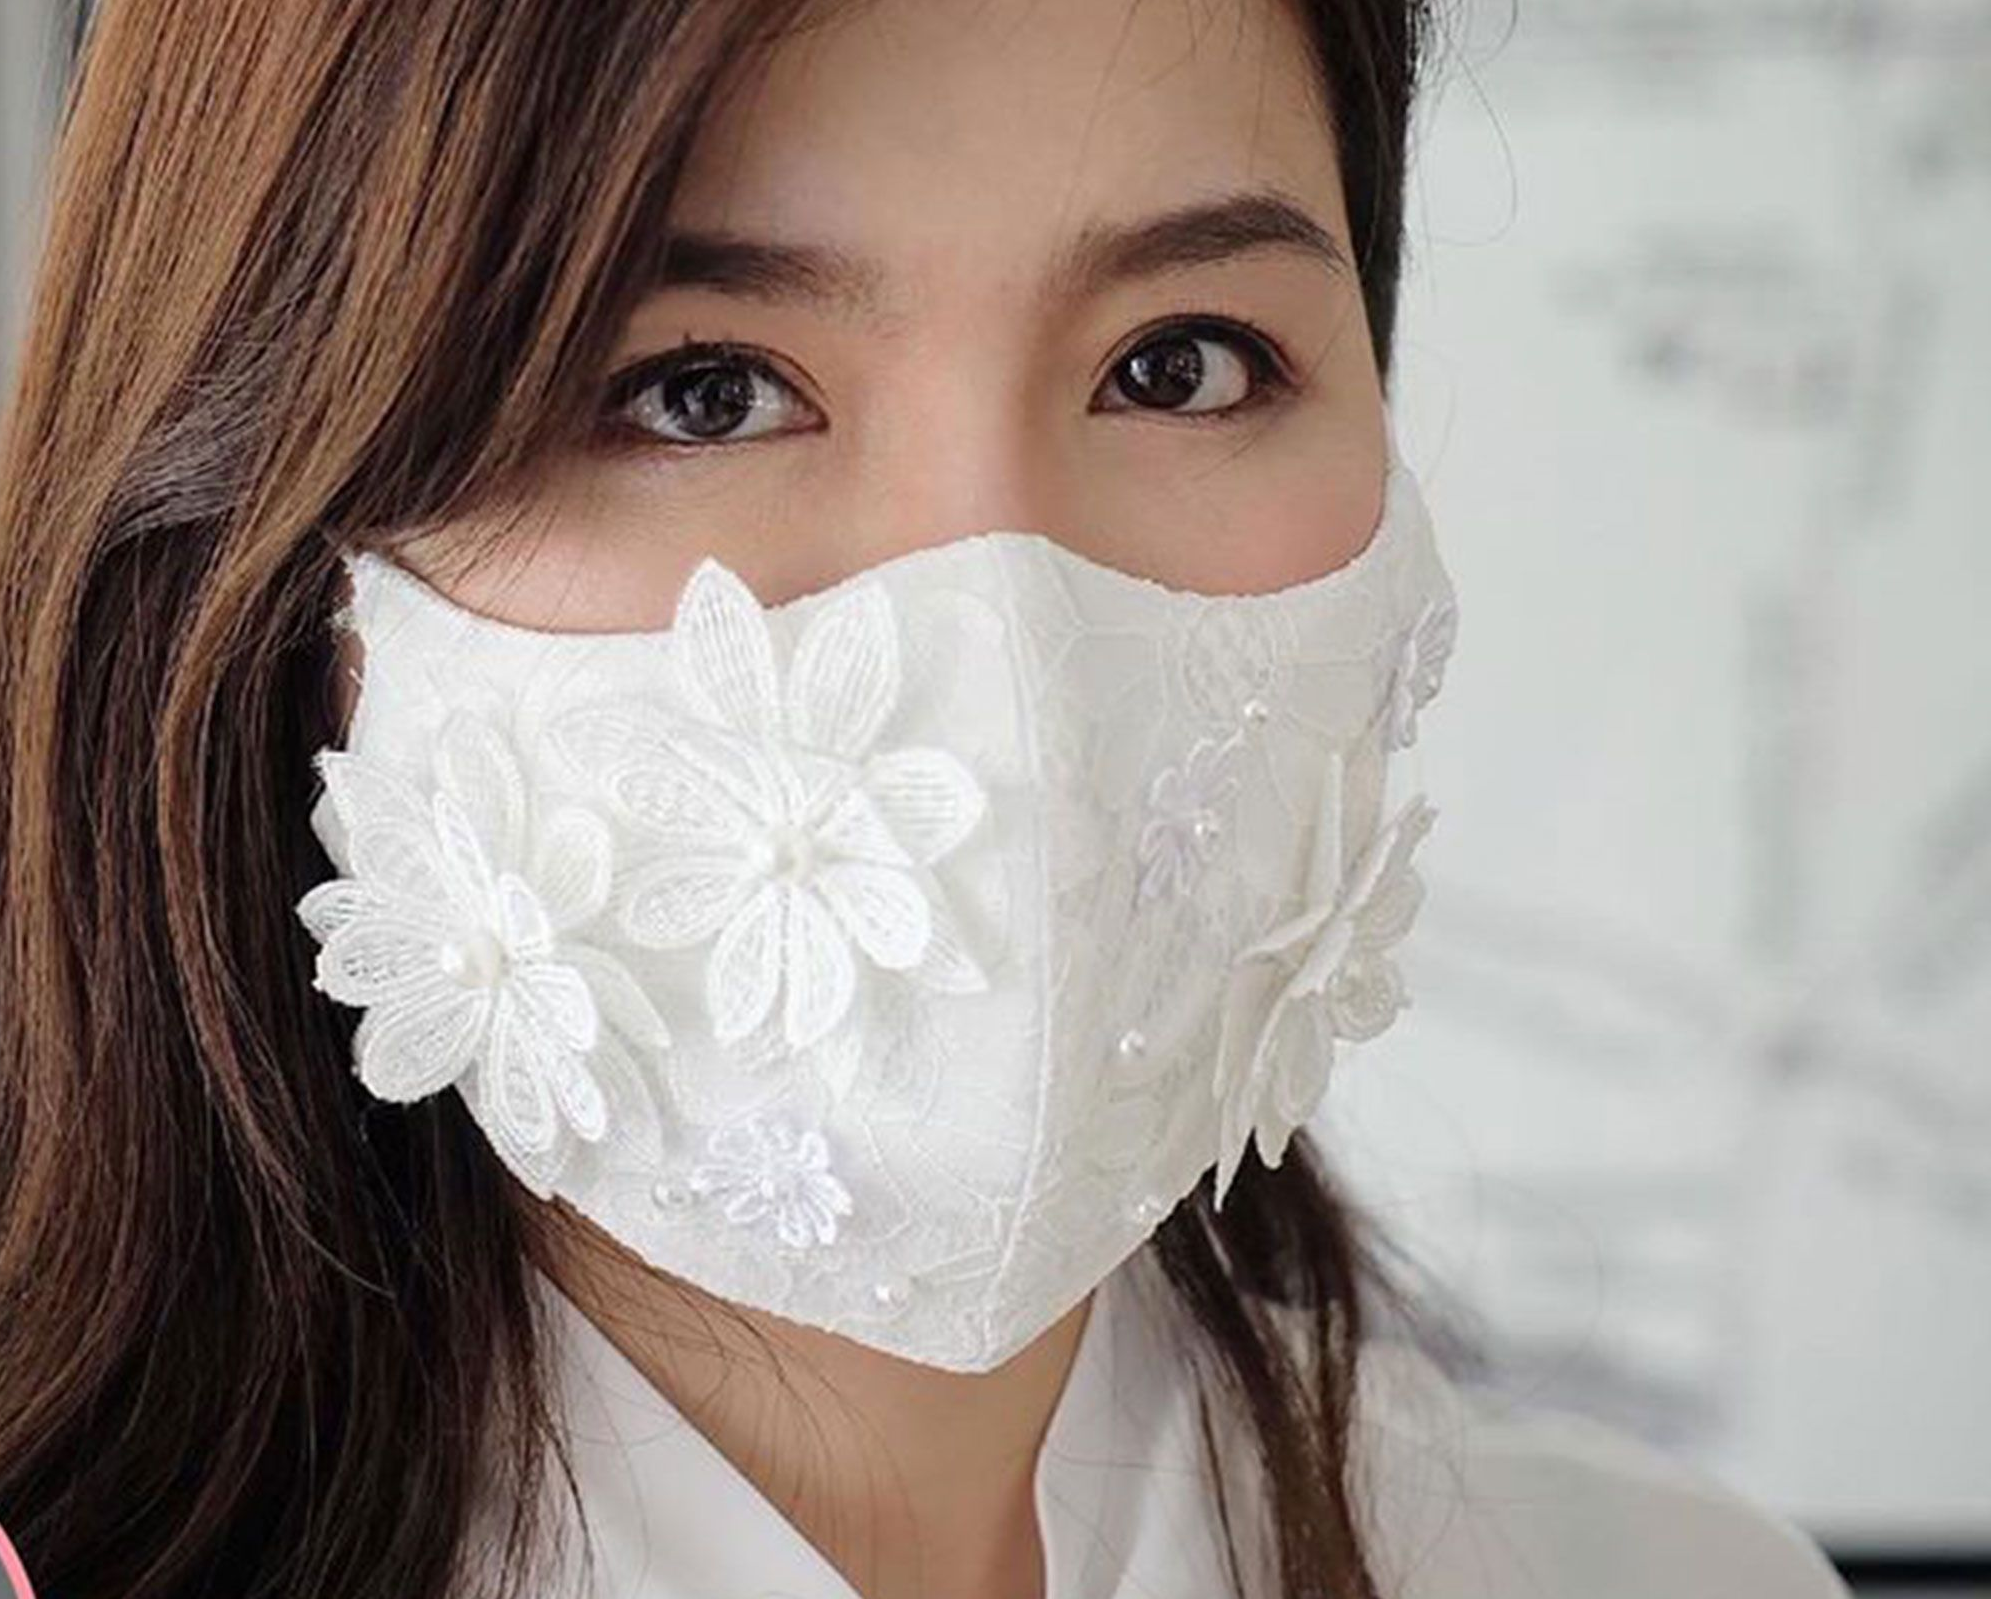 6 Ways to Make PPE More Fashionable